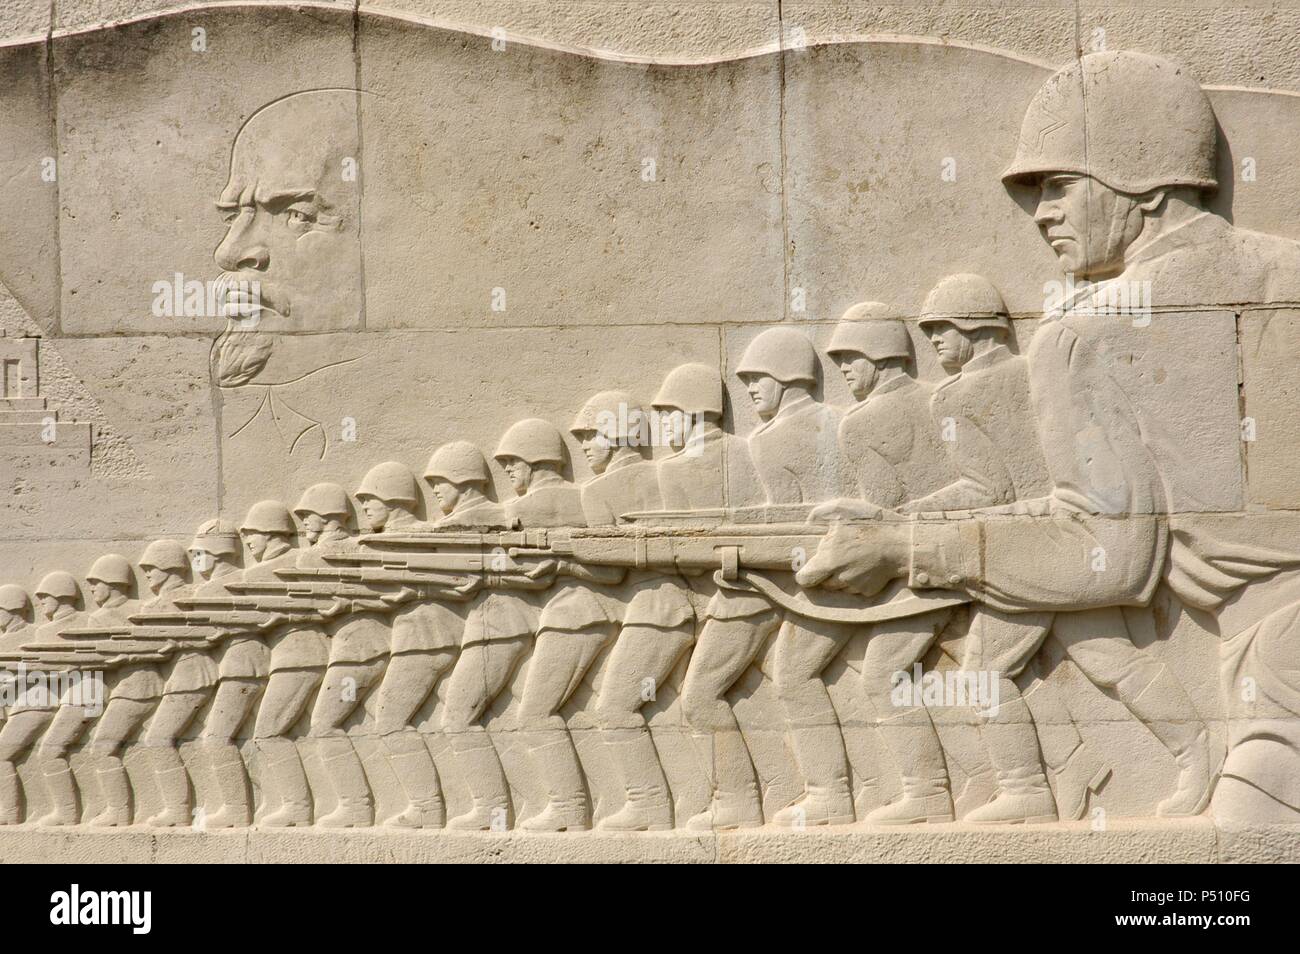 Sarcophagus with relief carving a military scene of soldiers of the Red ...